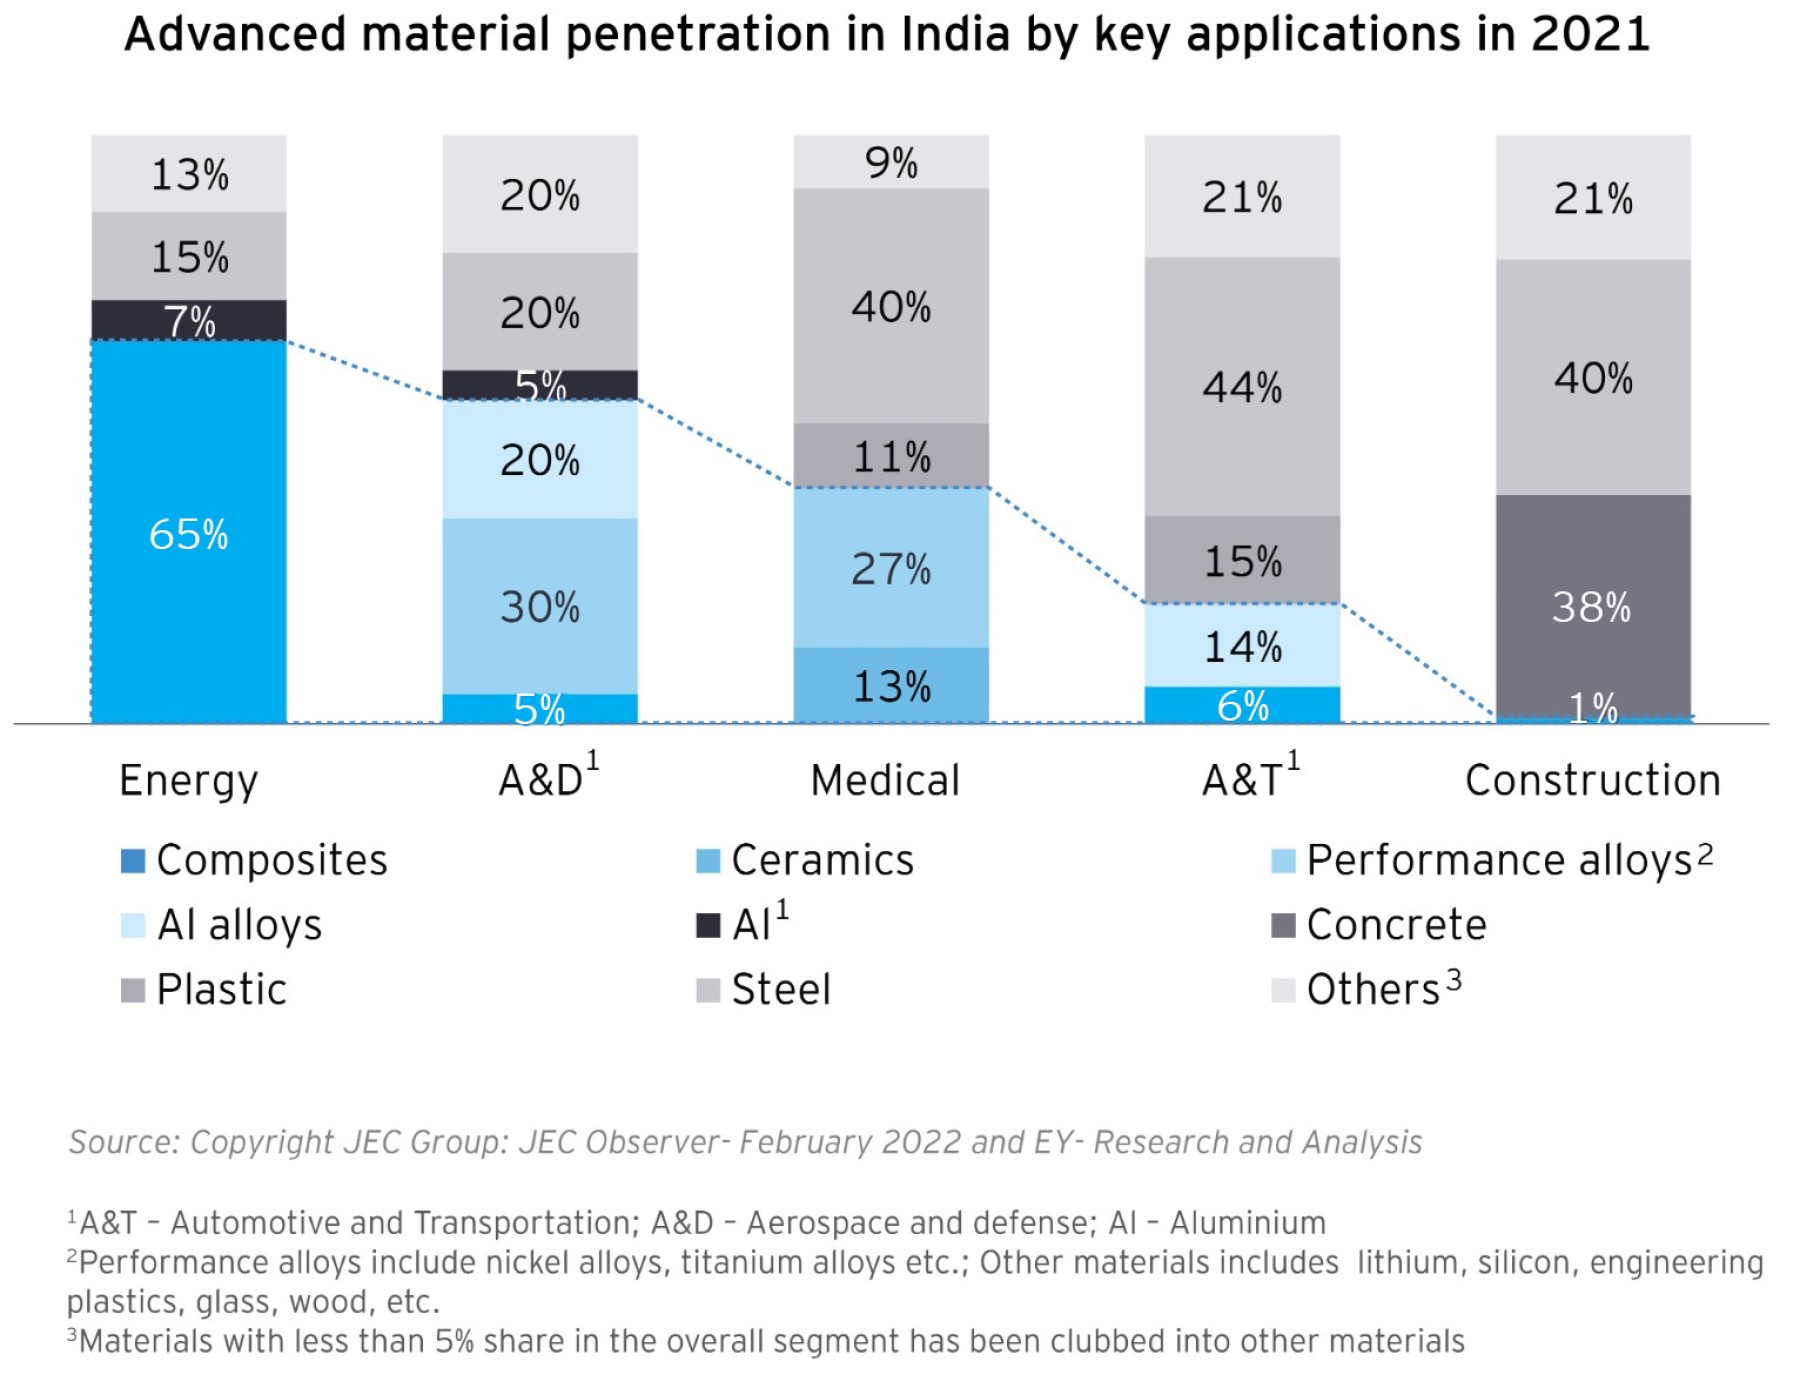 Advanced material penetration in India by key applications in 2021